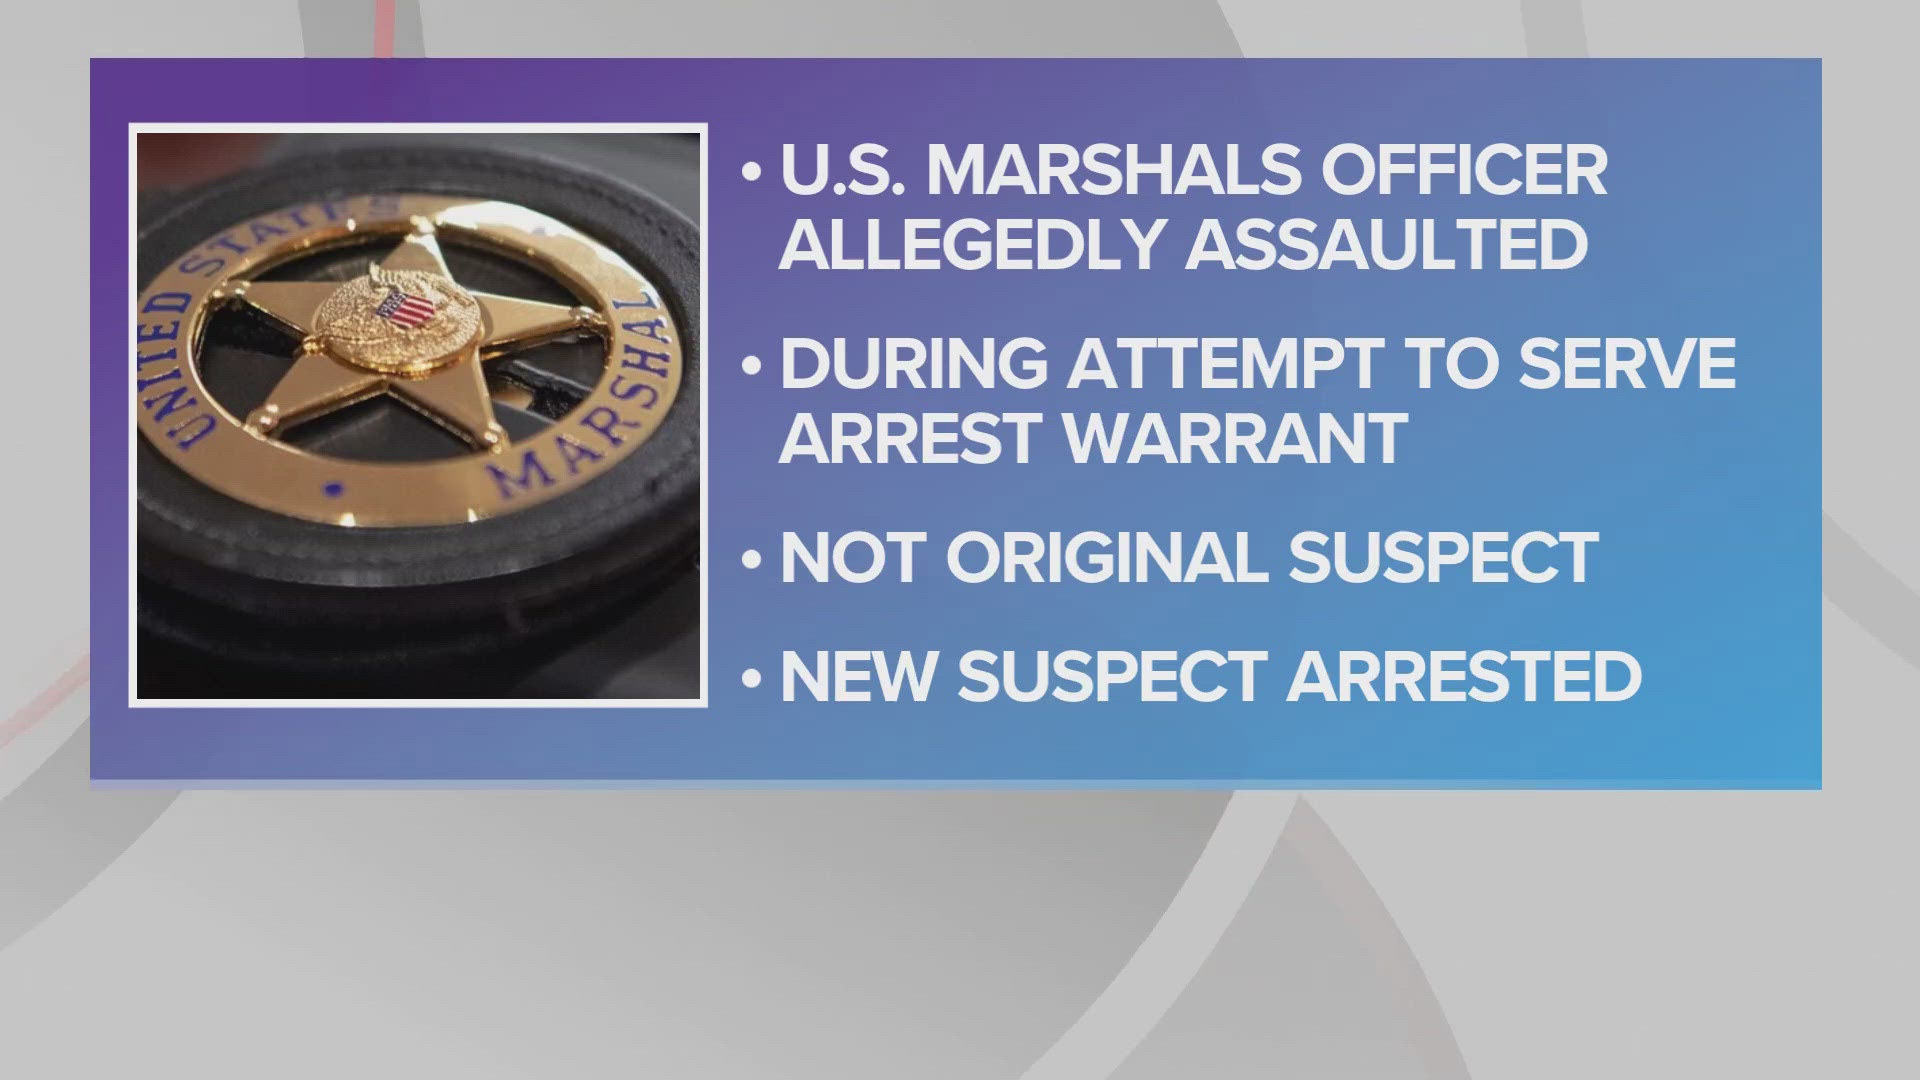 The original suspect of the warrant, Malik Shabazz, was not arrested and is still wanted.